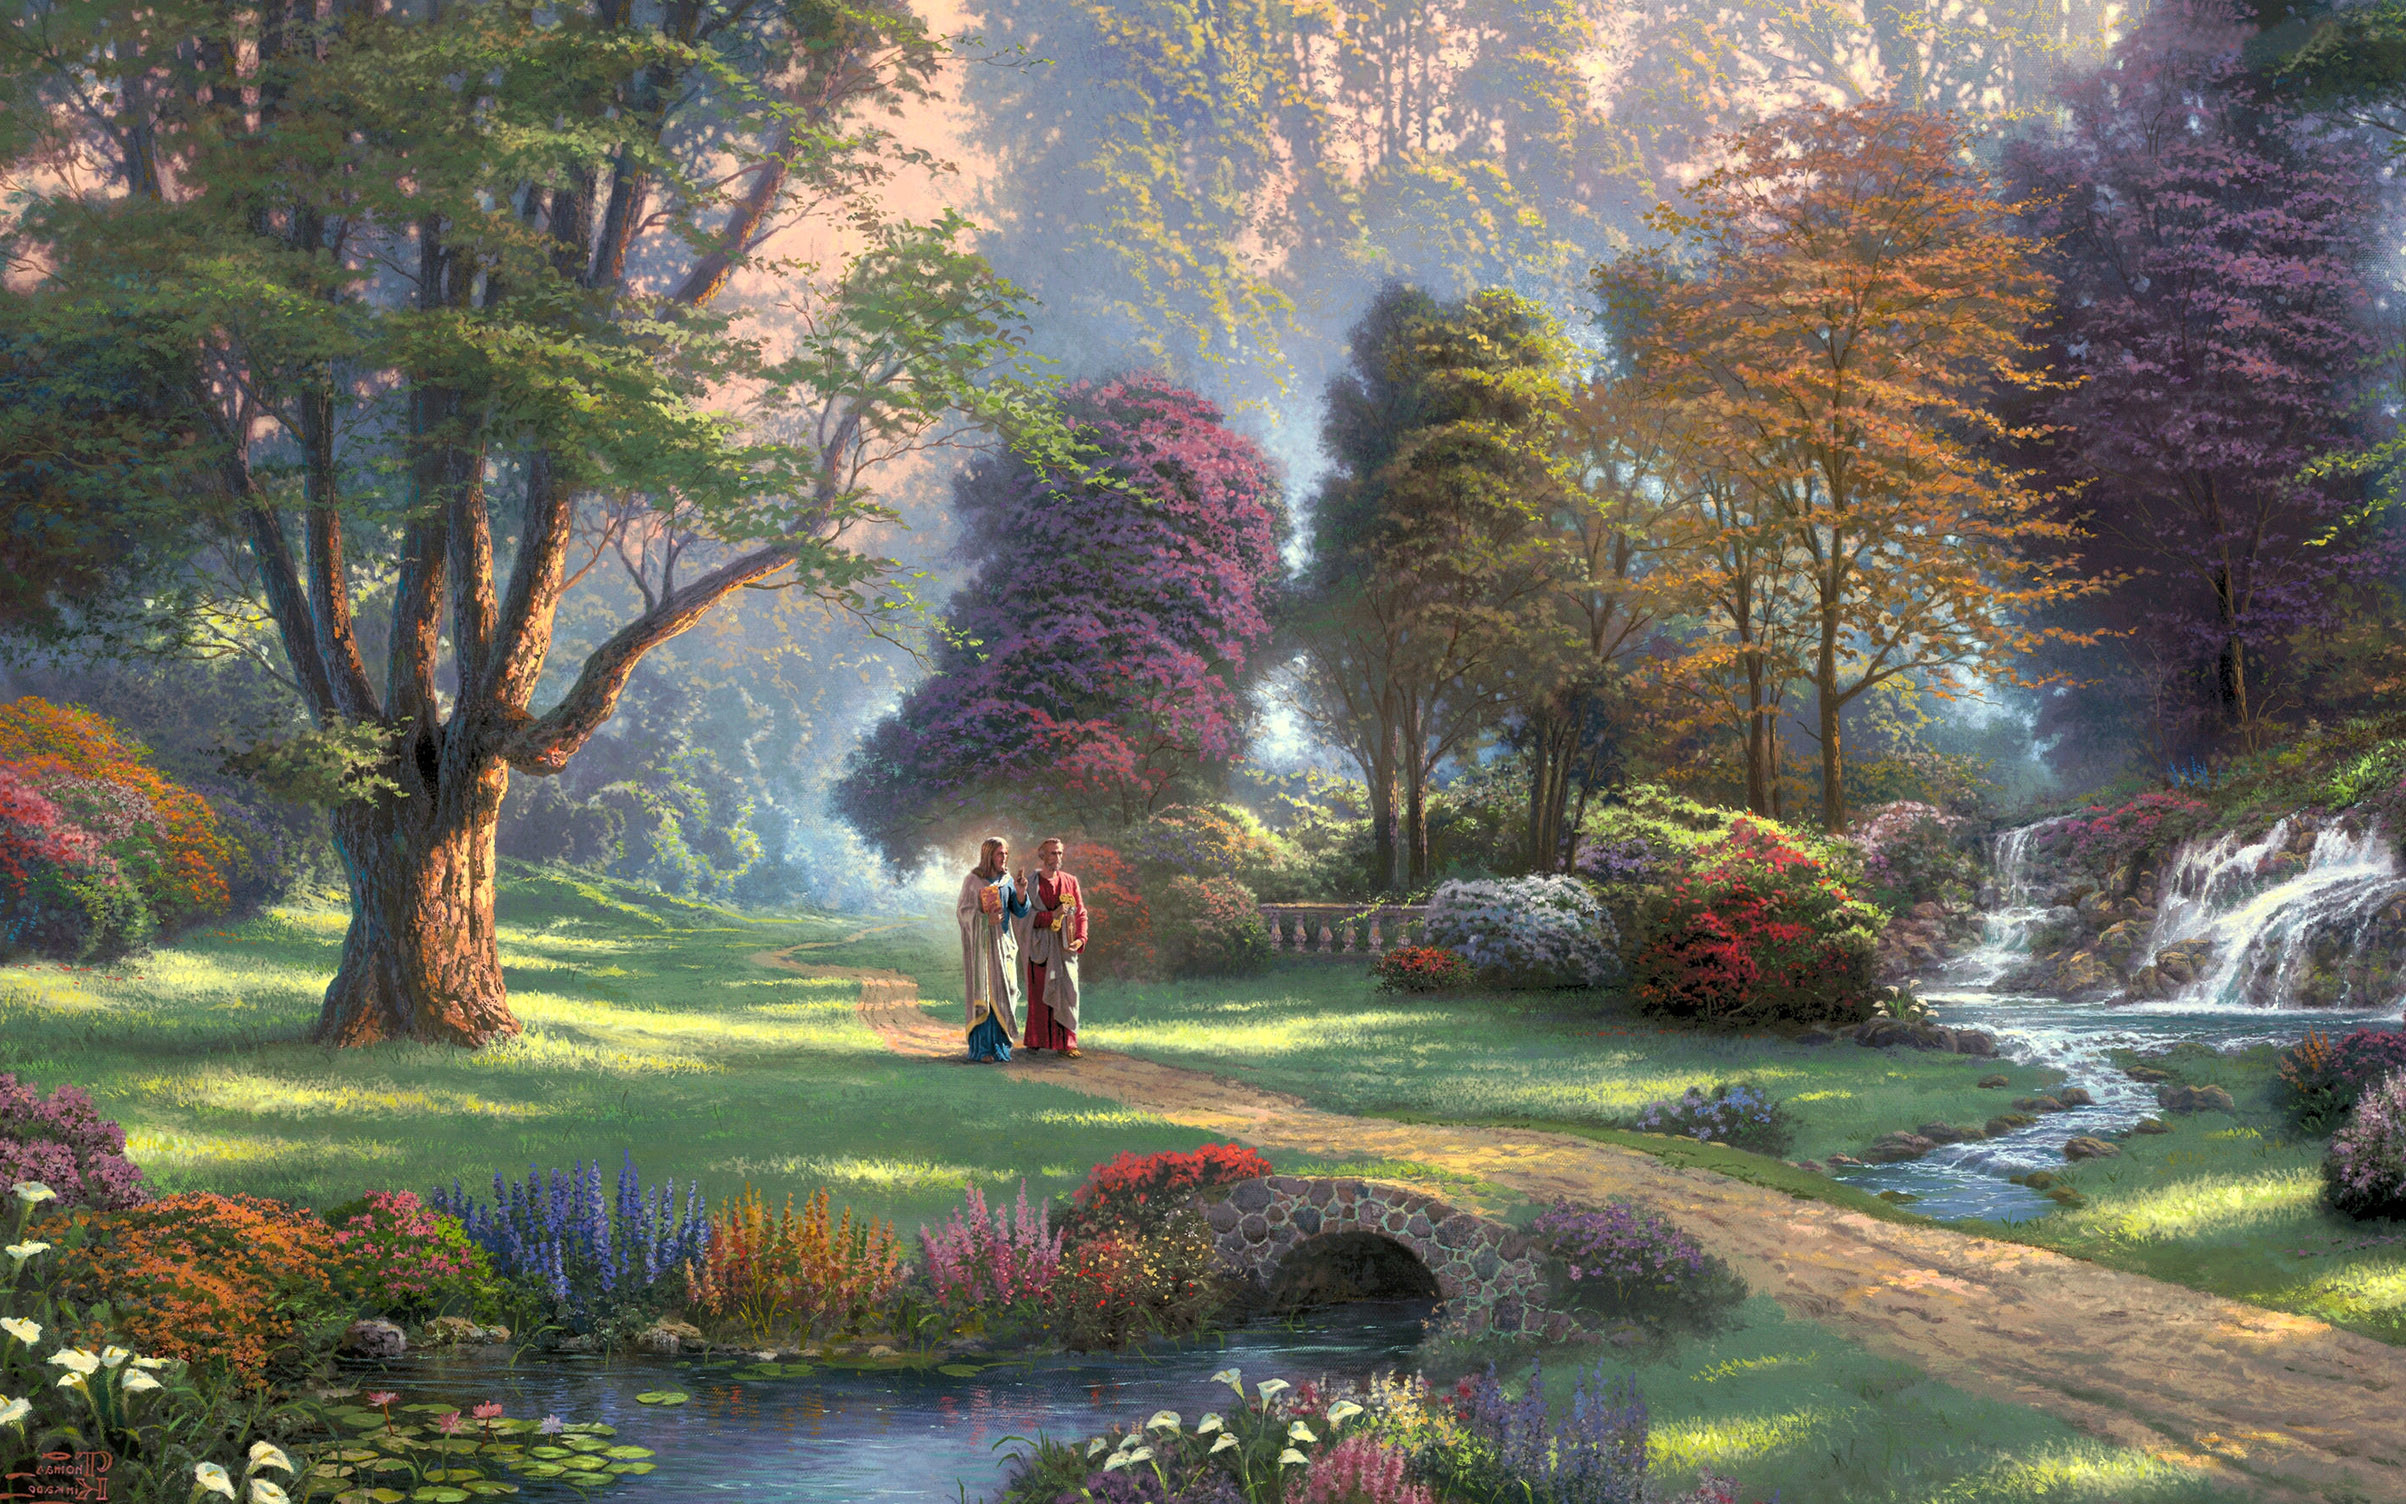 2406x1504 Thomas, Kinkade, Autumn, Wallpaper, Images, Amazing, Colorful, Absract,  Classic Painters, Historical Images, Widescreen, Art Wallpapers For  Windows, ...